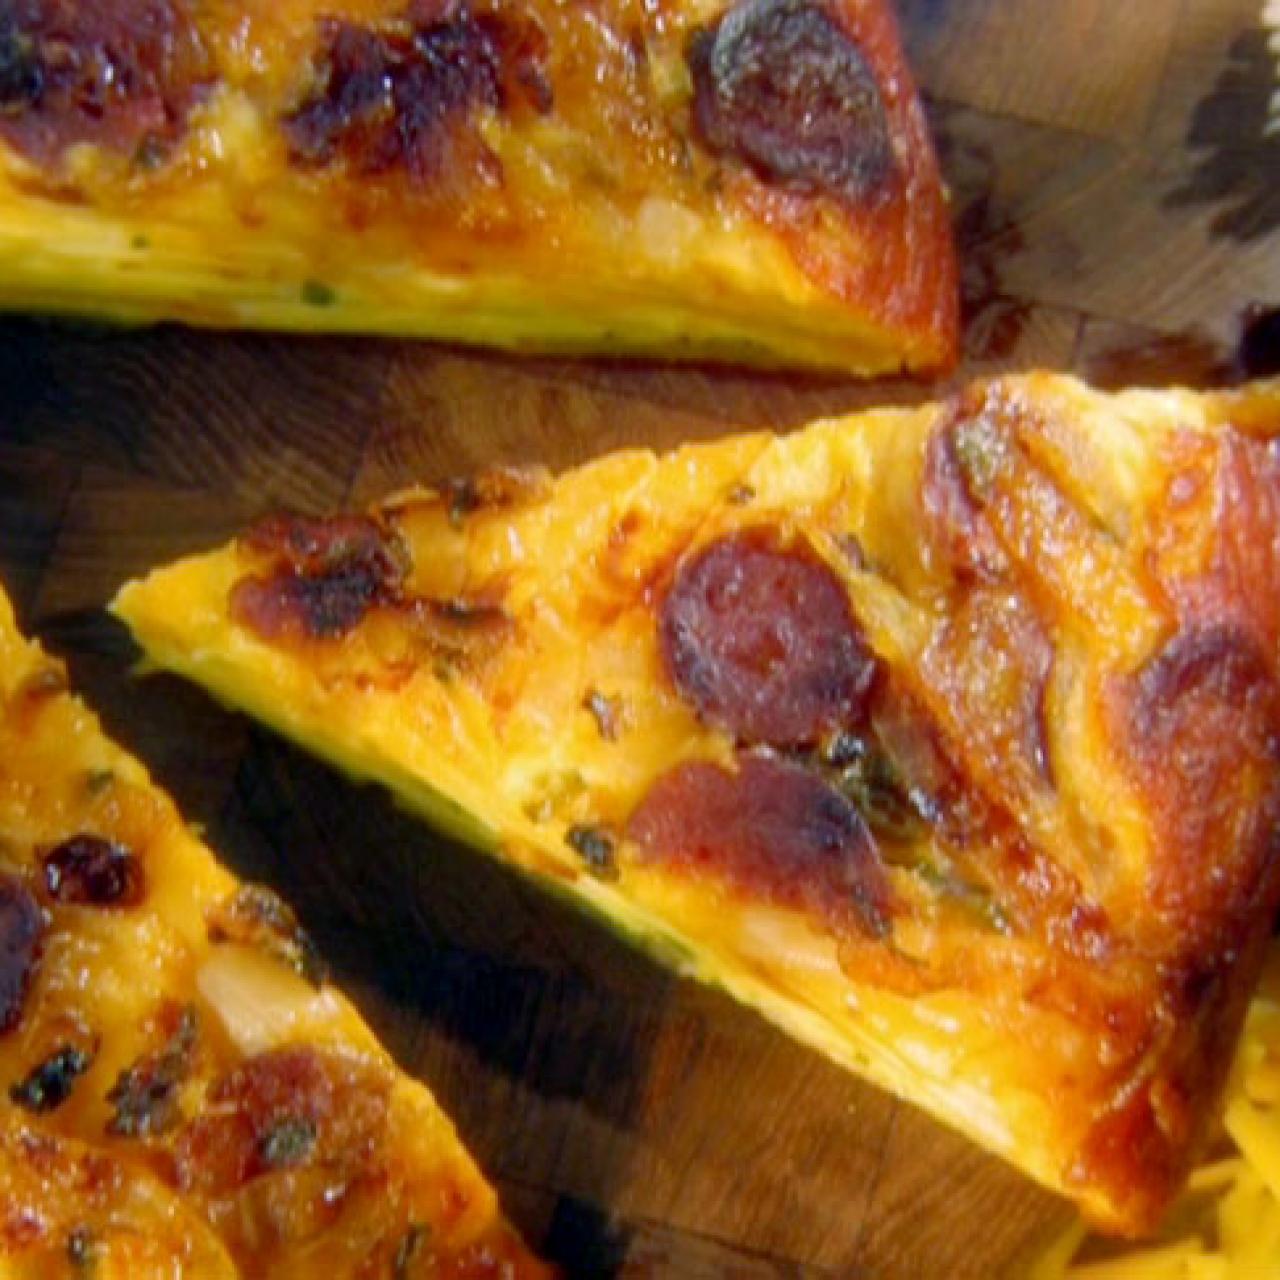 Authentic Spanish Tortilla Recipe - Oh, The Things We'll Make!